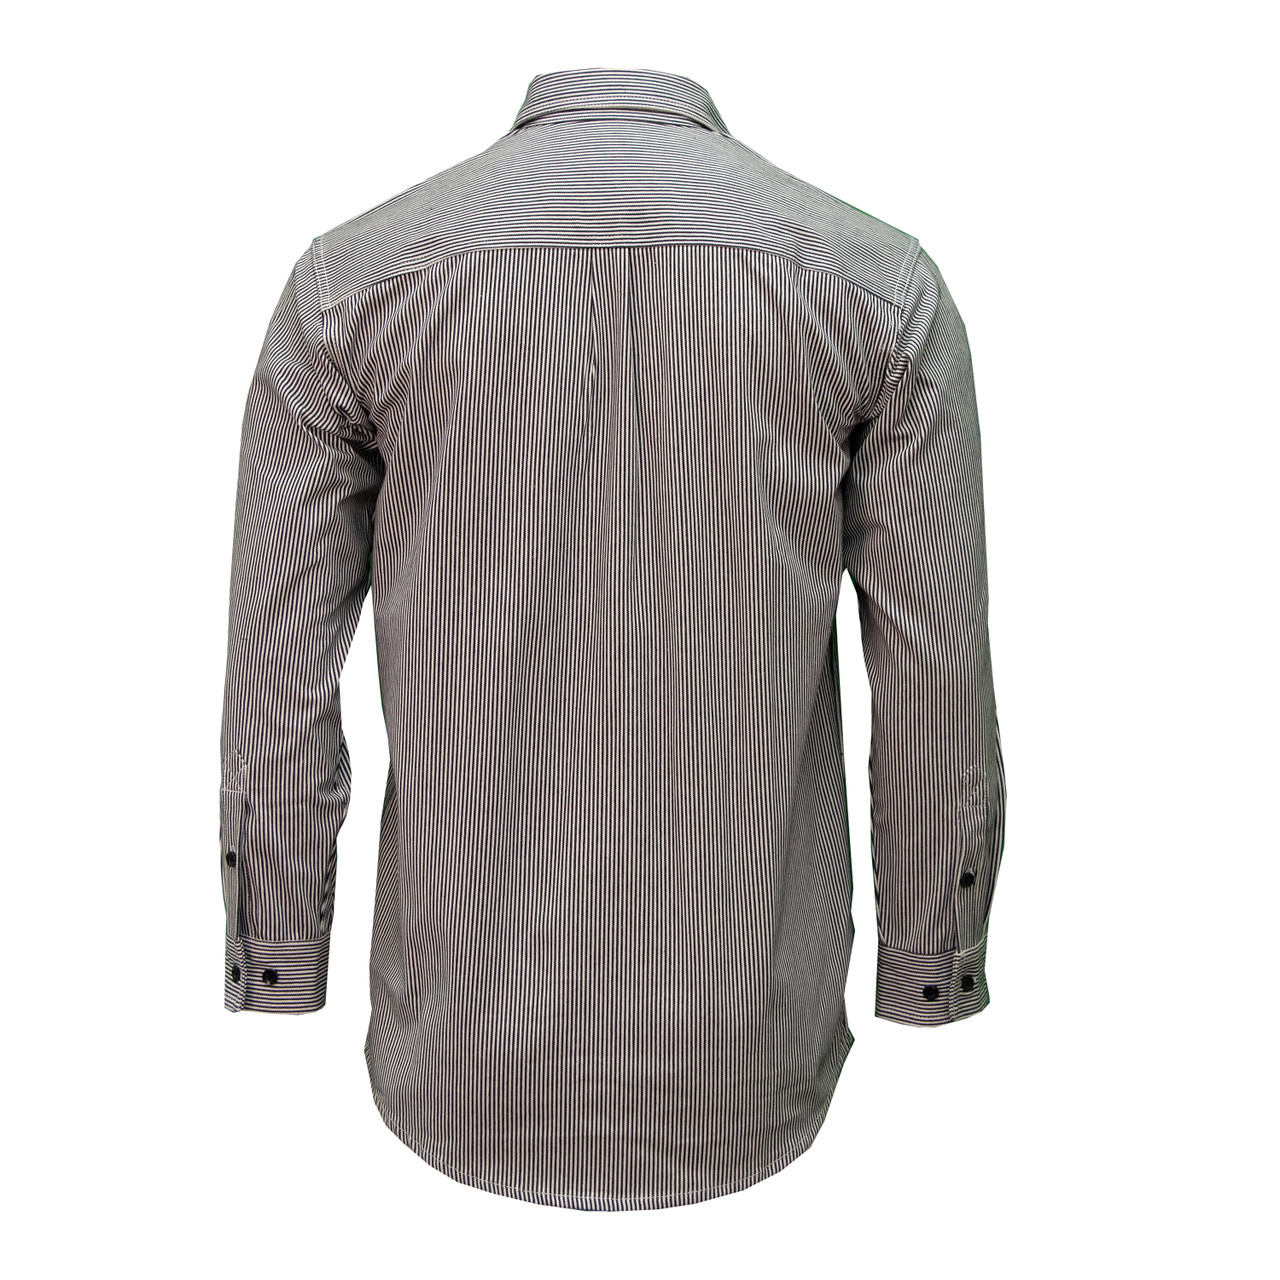 https://cdn11.bigcommerce.com/s-r4f6haoaux/images/stencil/1280x1280/products/217/805/hickory-stripe-long-sleeve-zip-front-logger-shirt-KEY-573-47-back__09315.1695743094.jpg?c=1